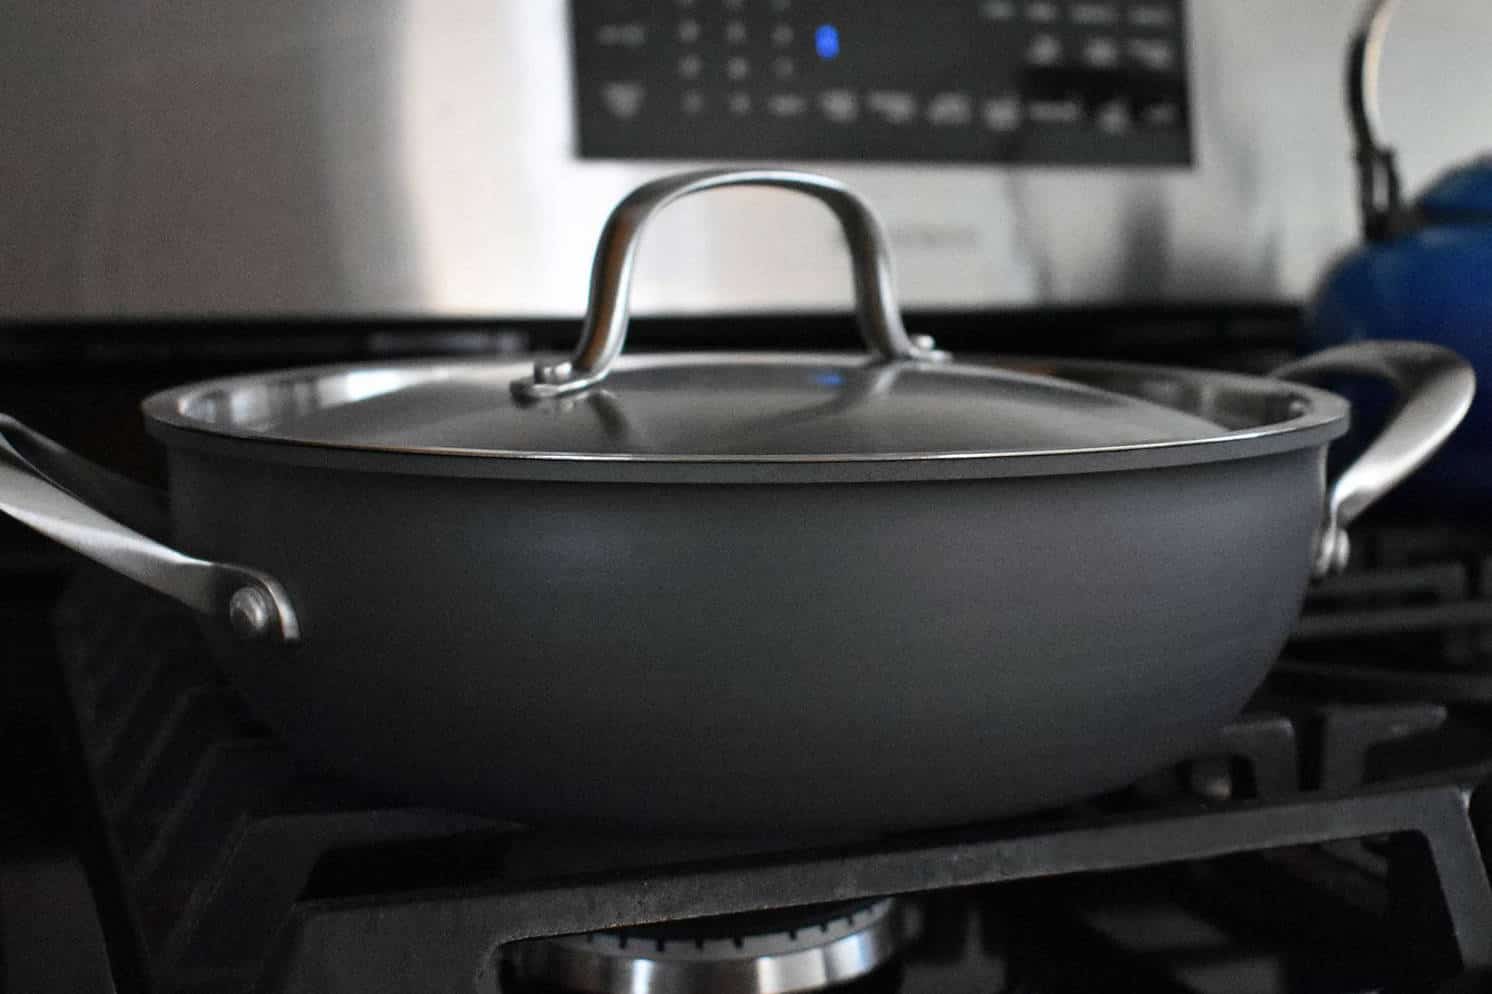 Cuisinart's nonstick pots and pans are made of